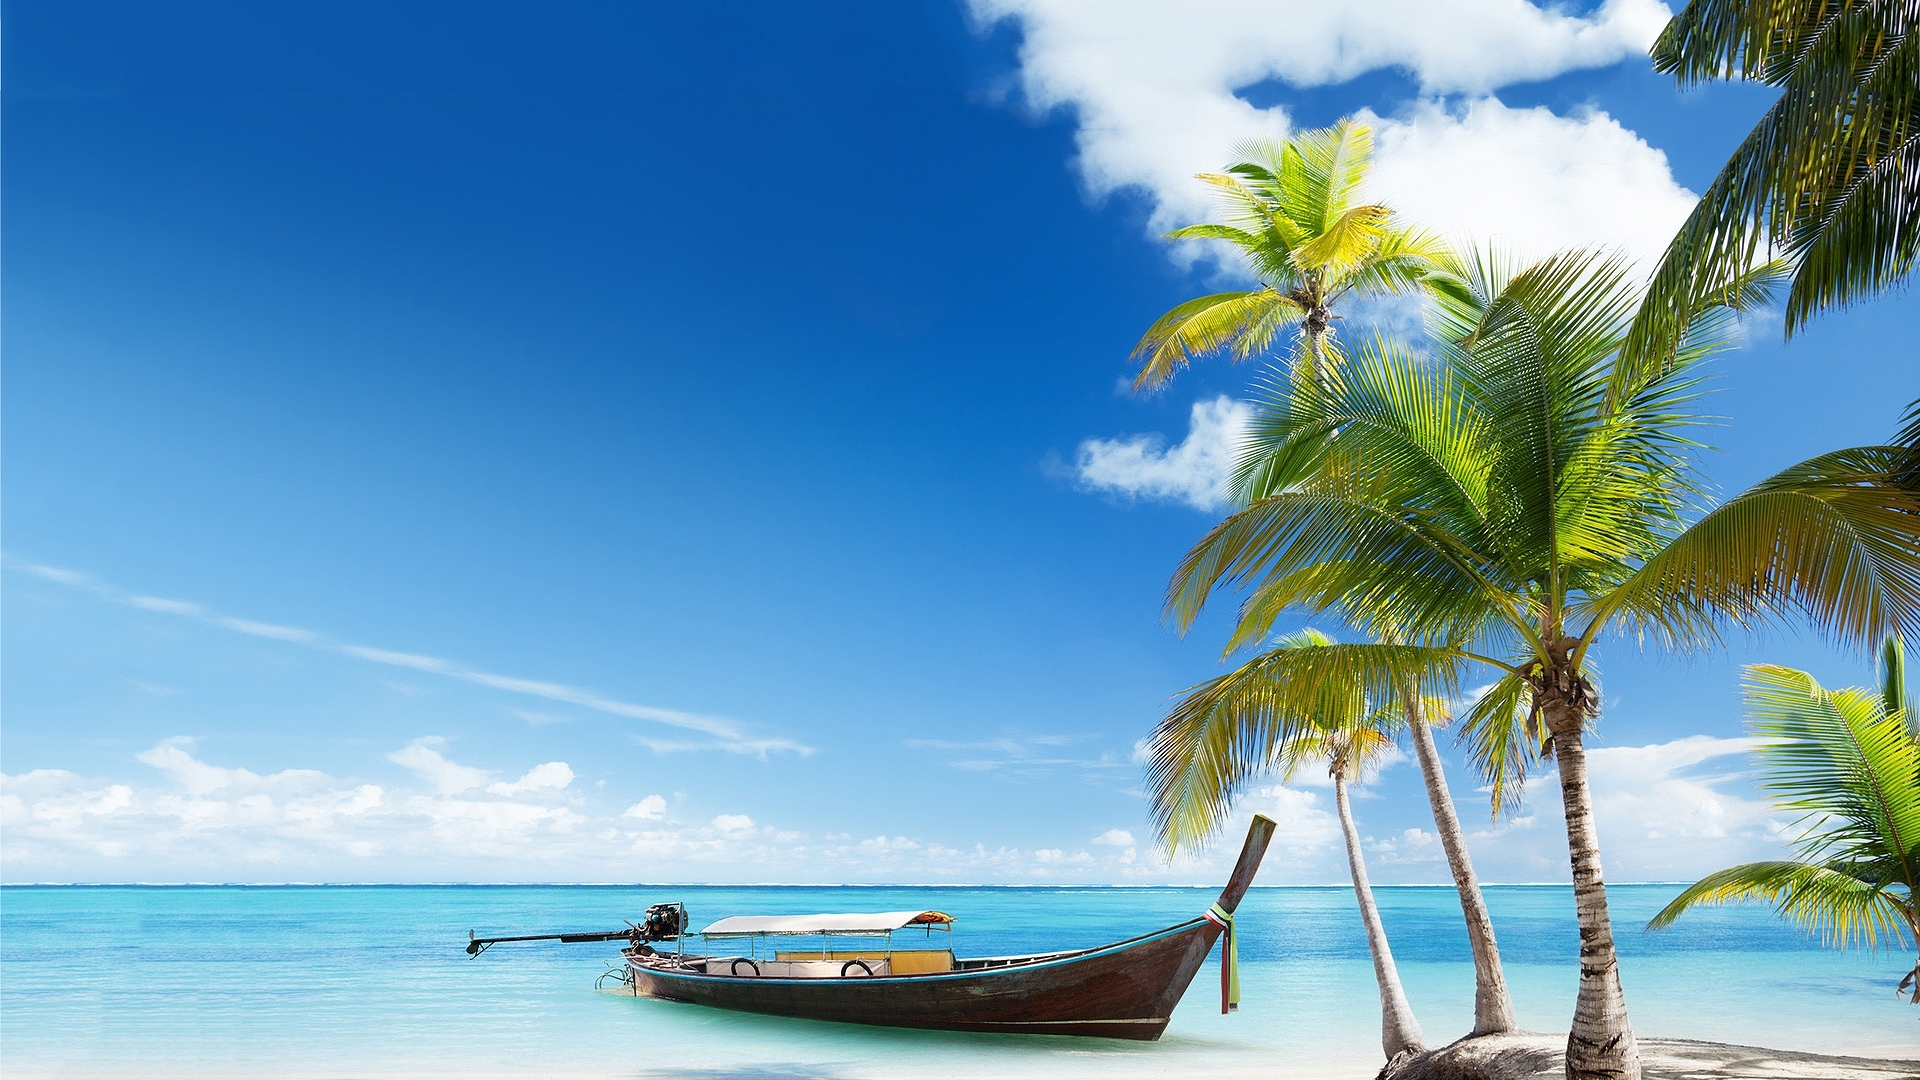  paradise island wallpaper in Nature wallpapers with all resolutions